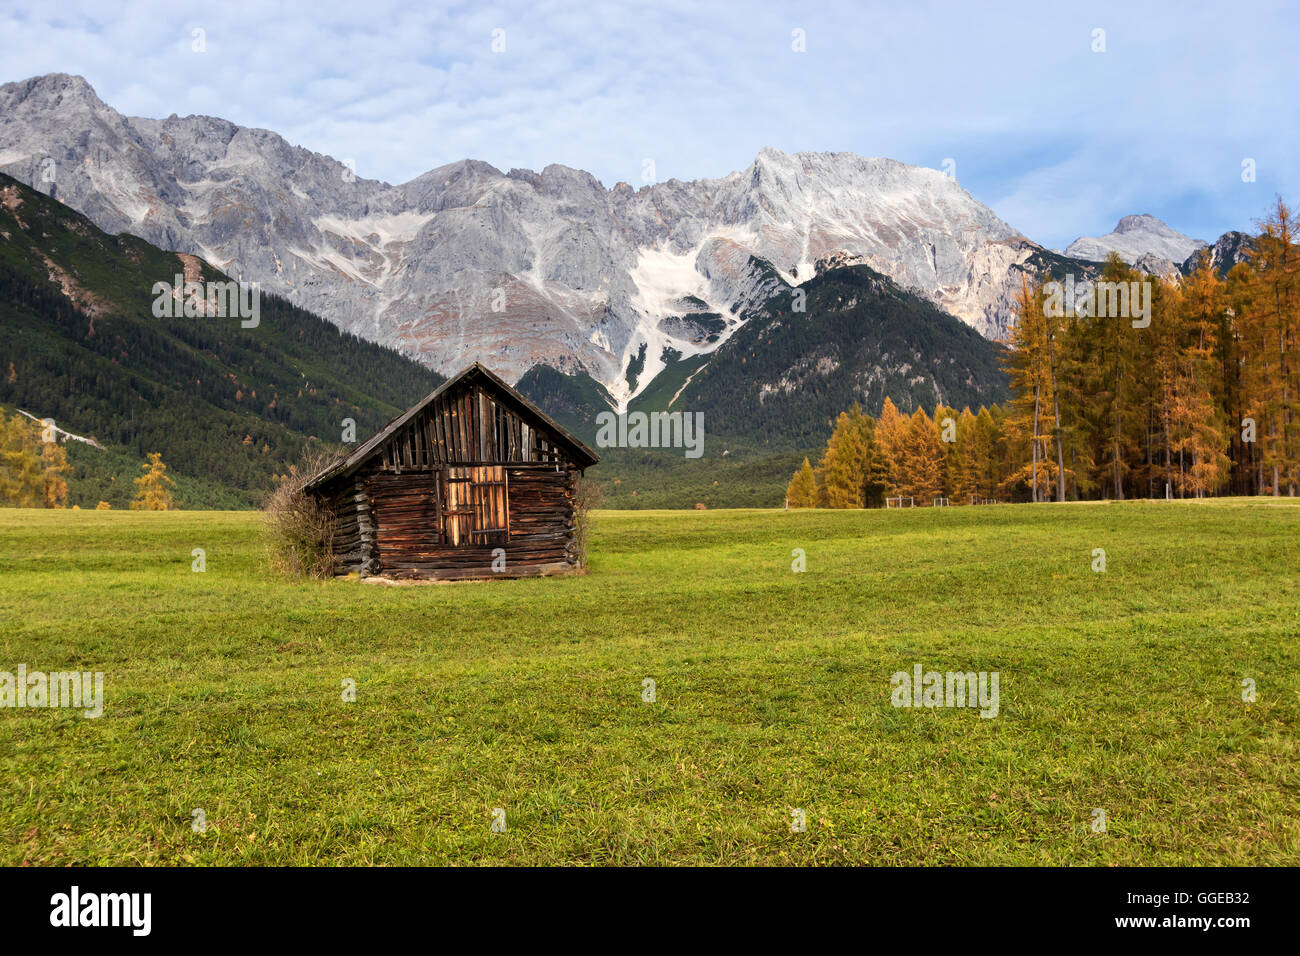 Autumn rural scenery of Miemenger Plateau with rocky mountains peaks in the background. Austria, Europe, Tyrol. Stock Photo